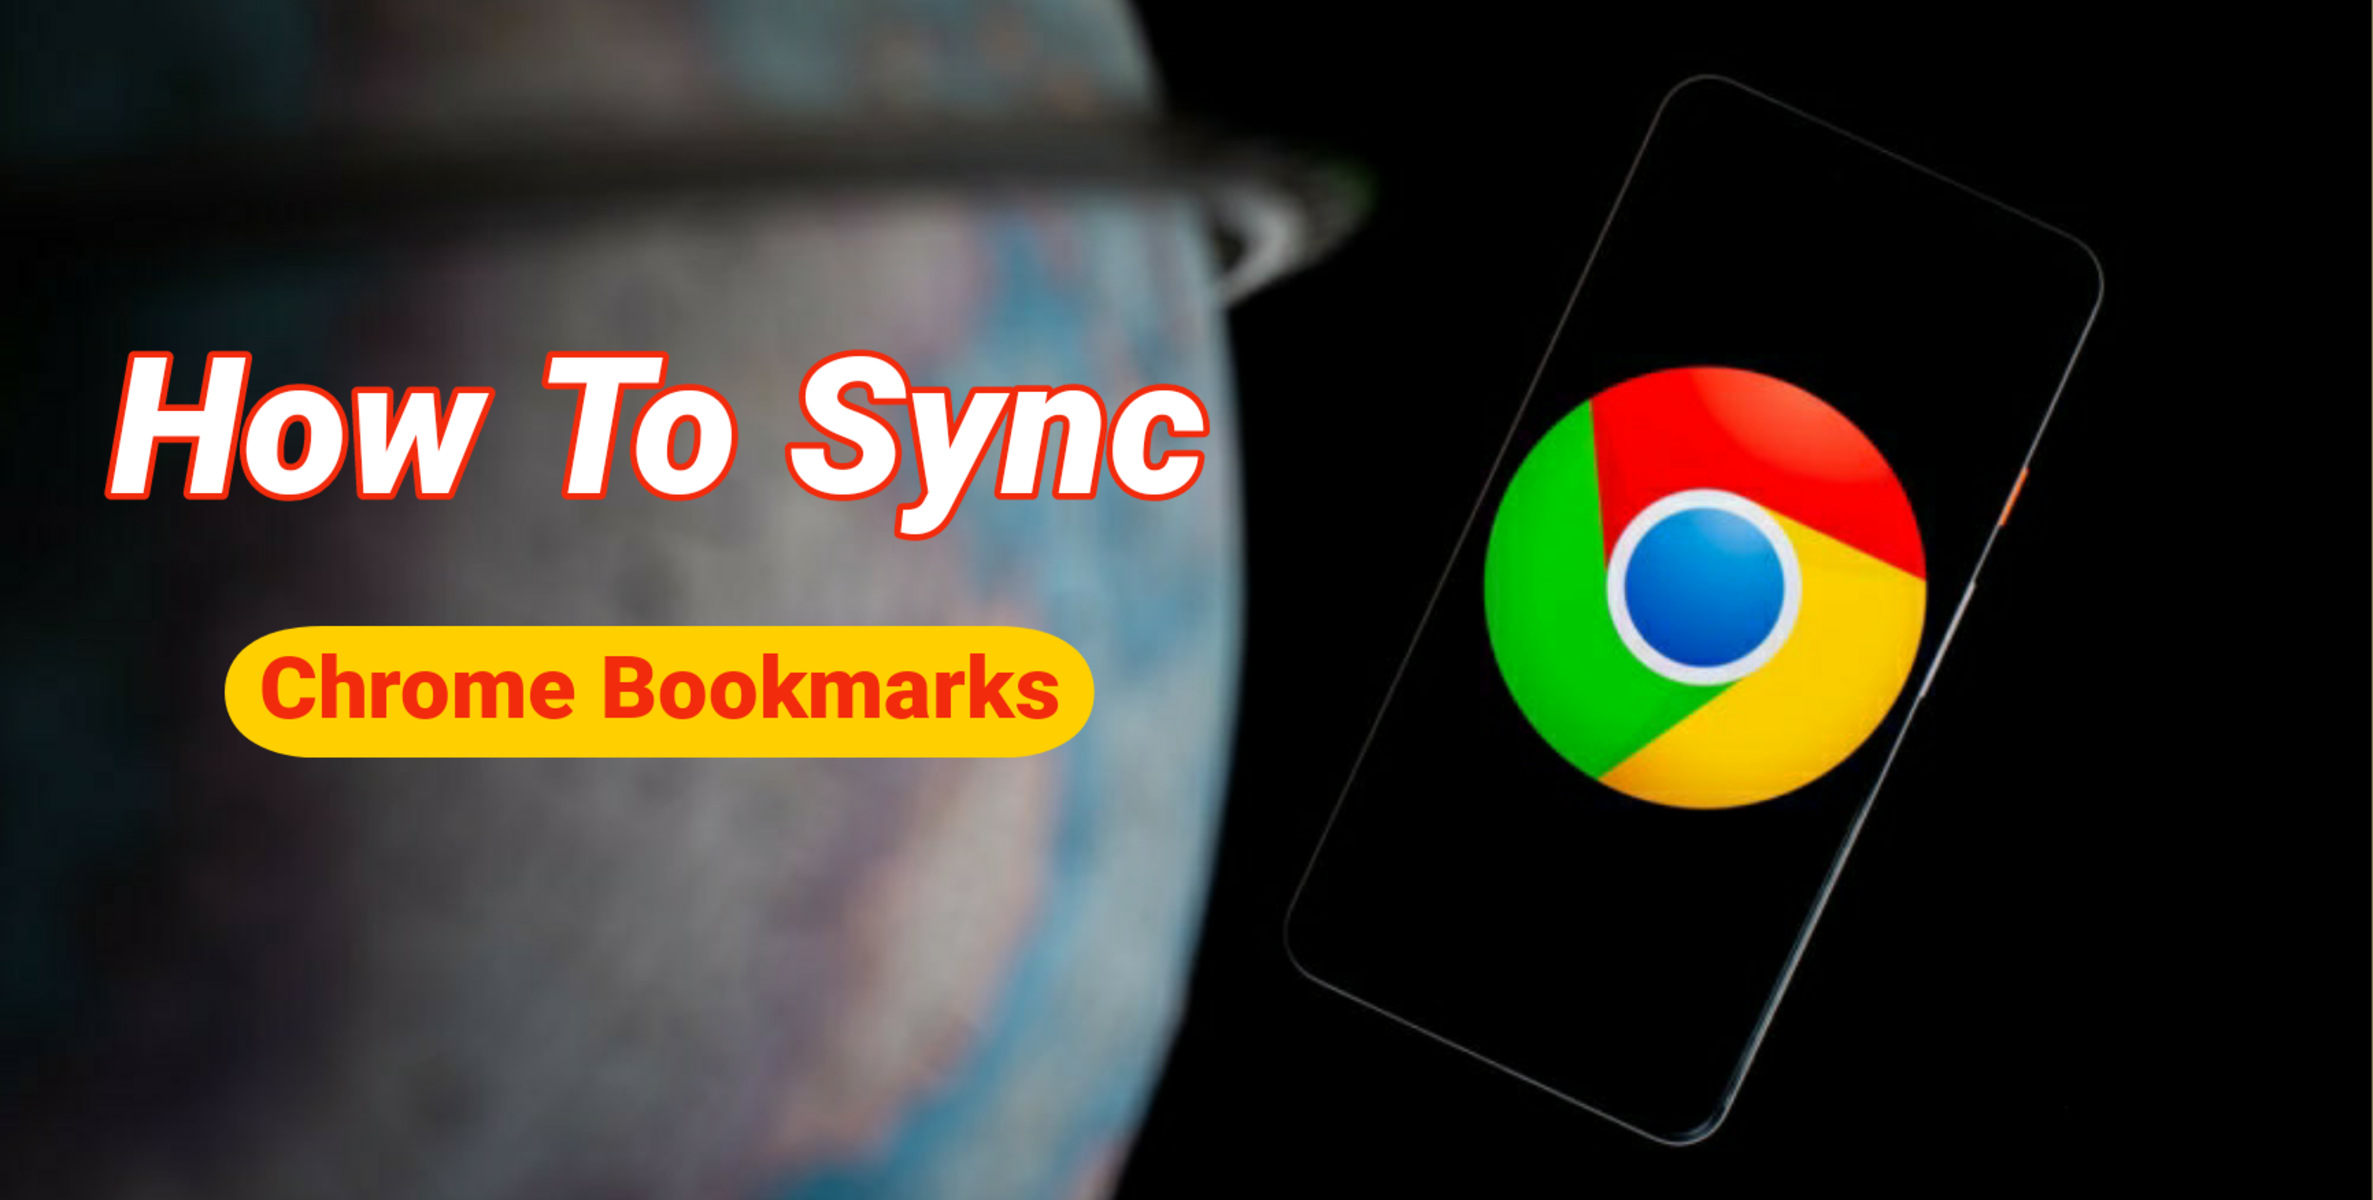 How To Sync Chrome Bookmarks On Android